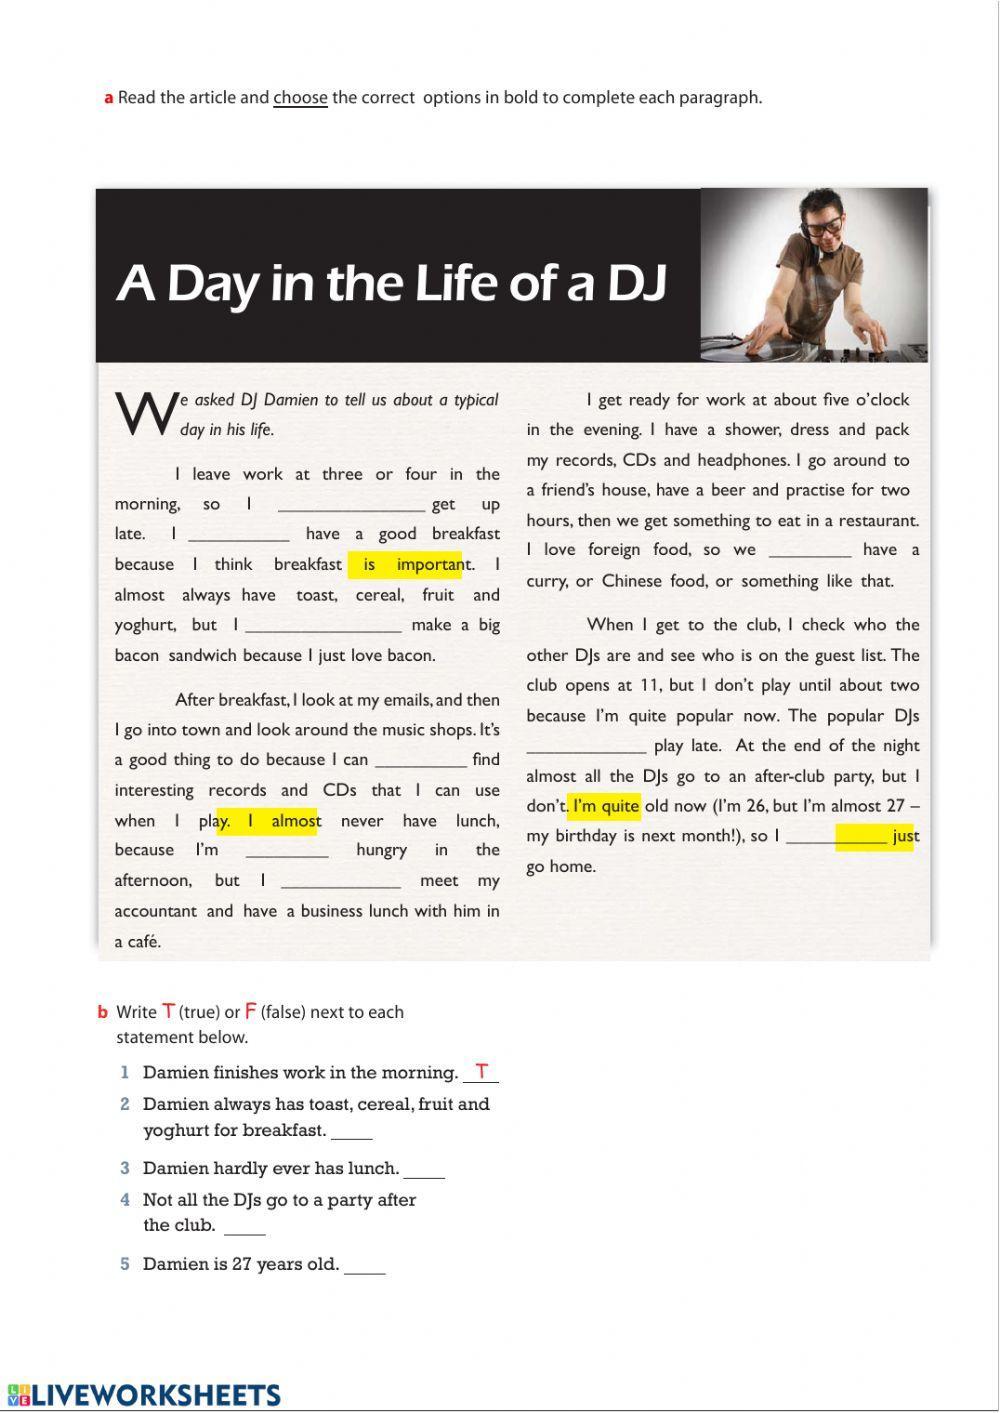 A day in a life of a DJ